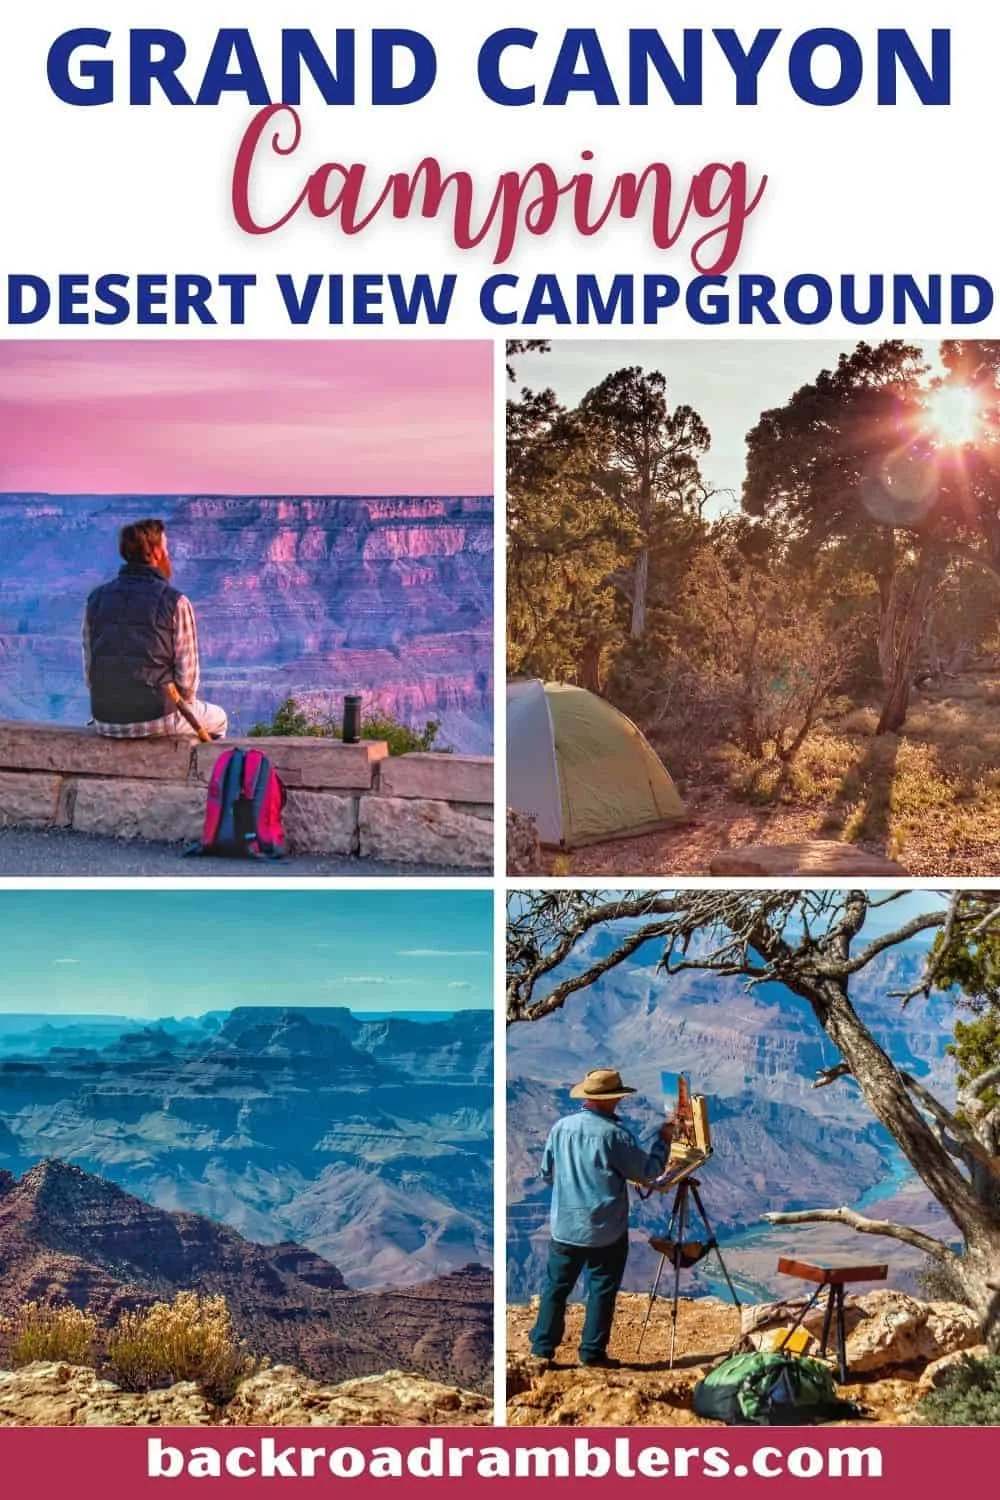 A collage of photos from Grand Canyon National Park. Caption reads: Grand Canyon Camping at Desert View Campground